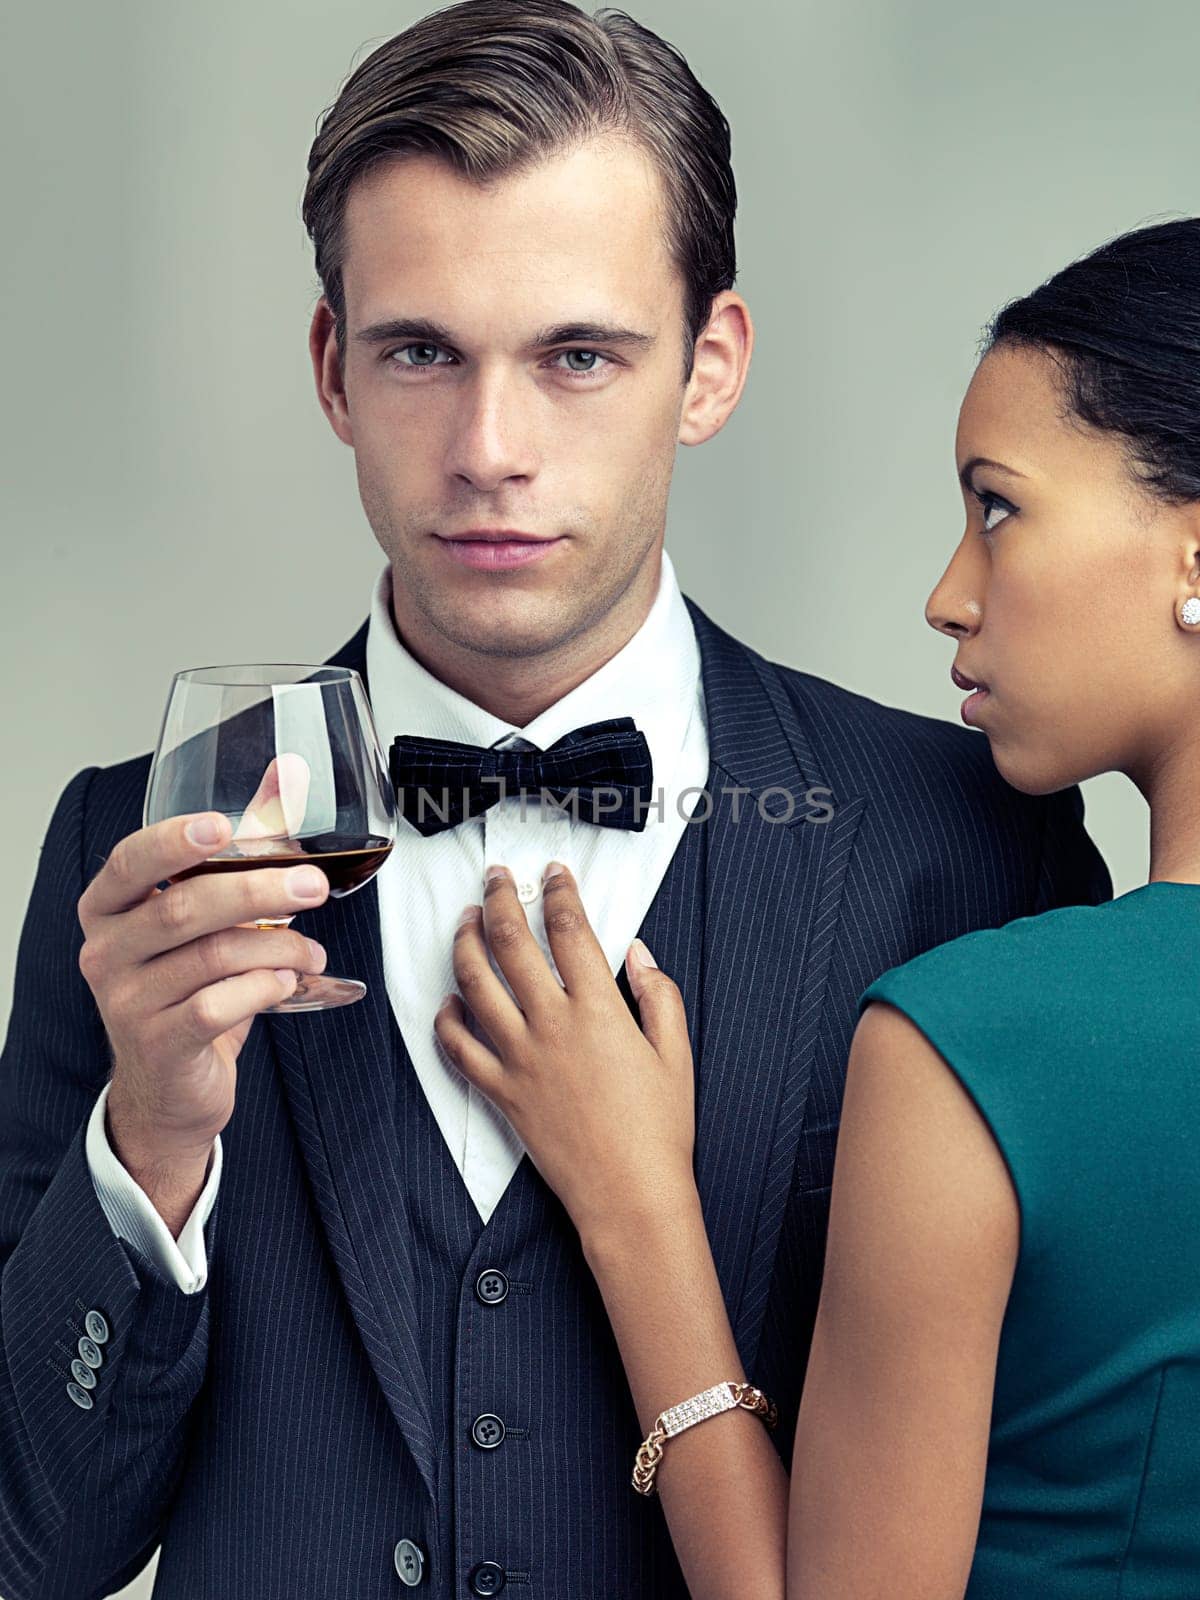 Alcohol, fashion and portrait of couple in studio with elegant, formal and stylish clothes for event. Luxury, party and man and woman with drink and confidence, pride and glamour on gray background.